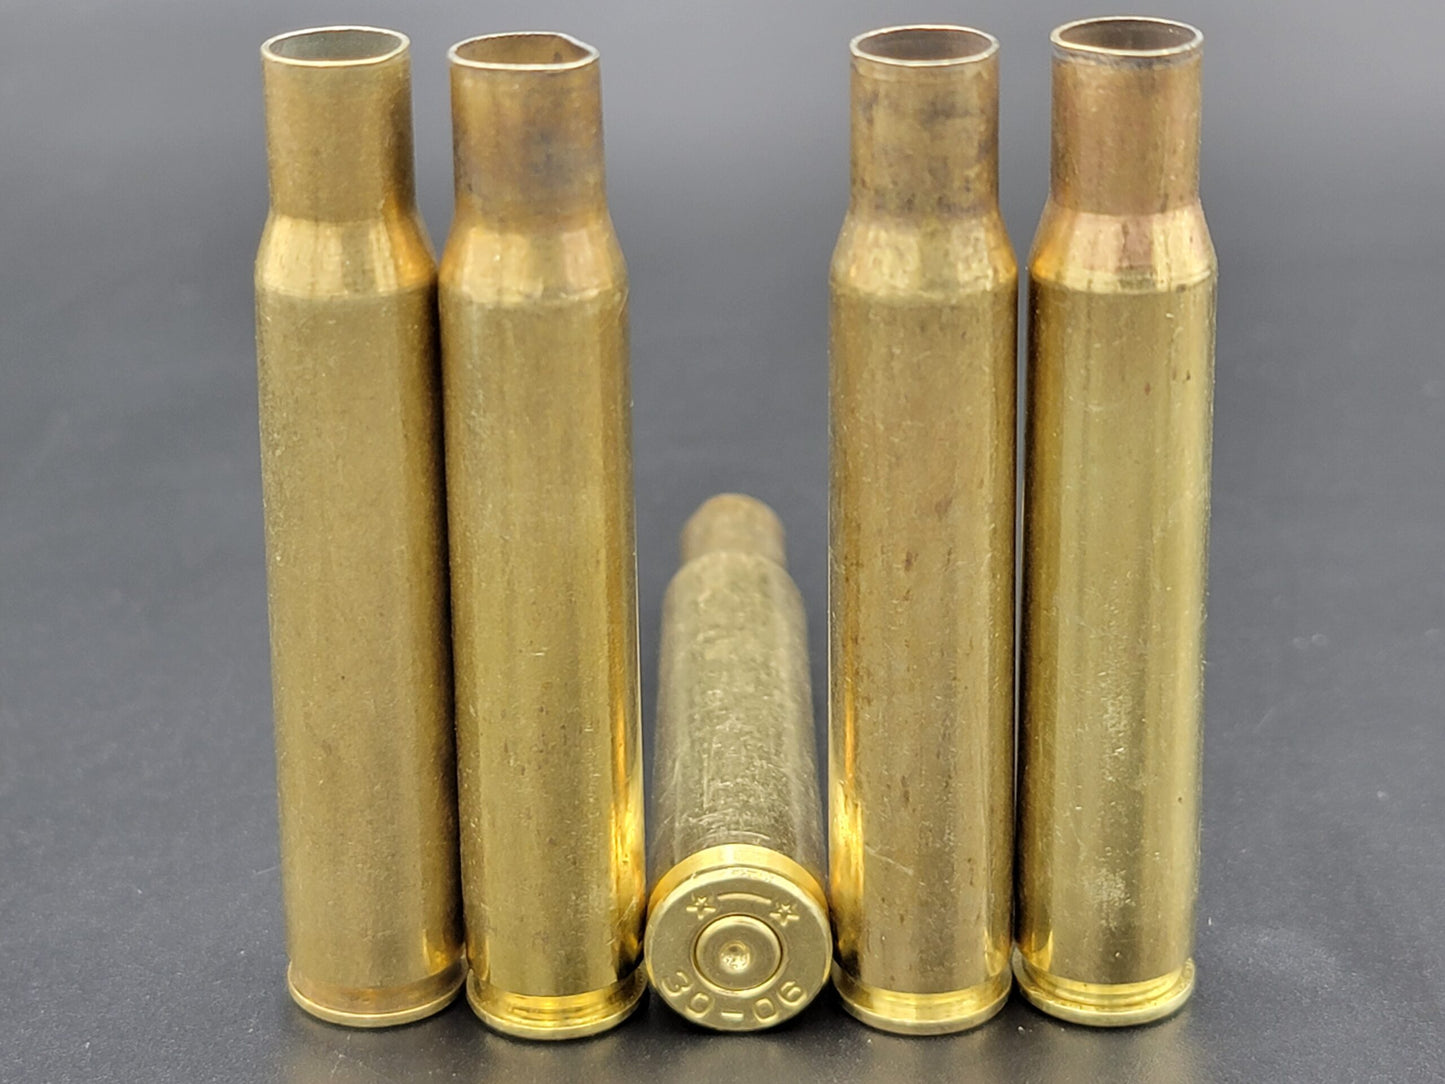 30-06 once fired rifle brass. Hand sorted from reputable indoor/military ranges for reloading. Reliable spent casings for precision shooting.